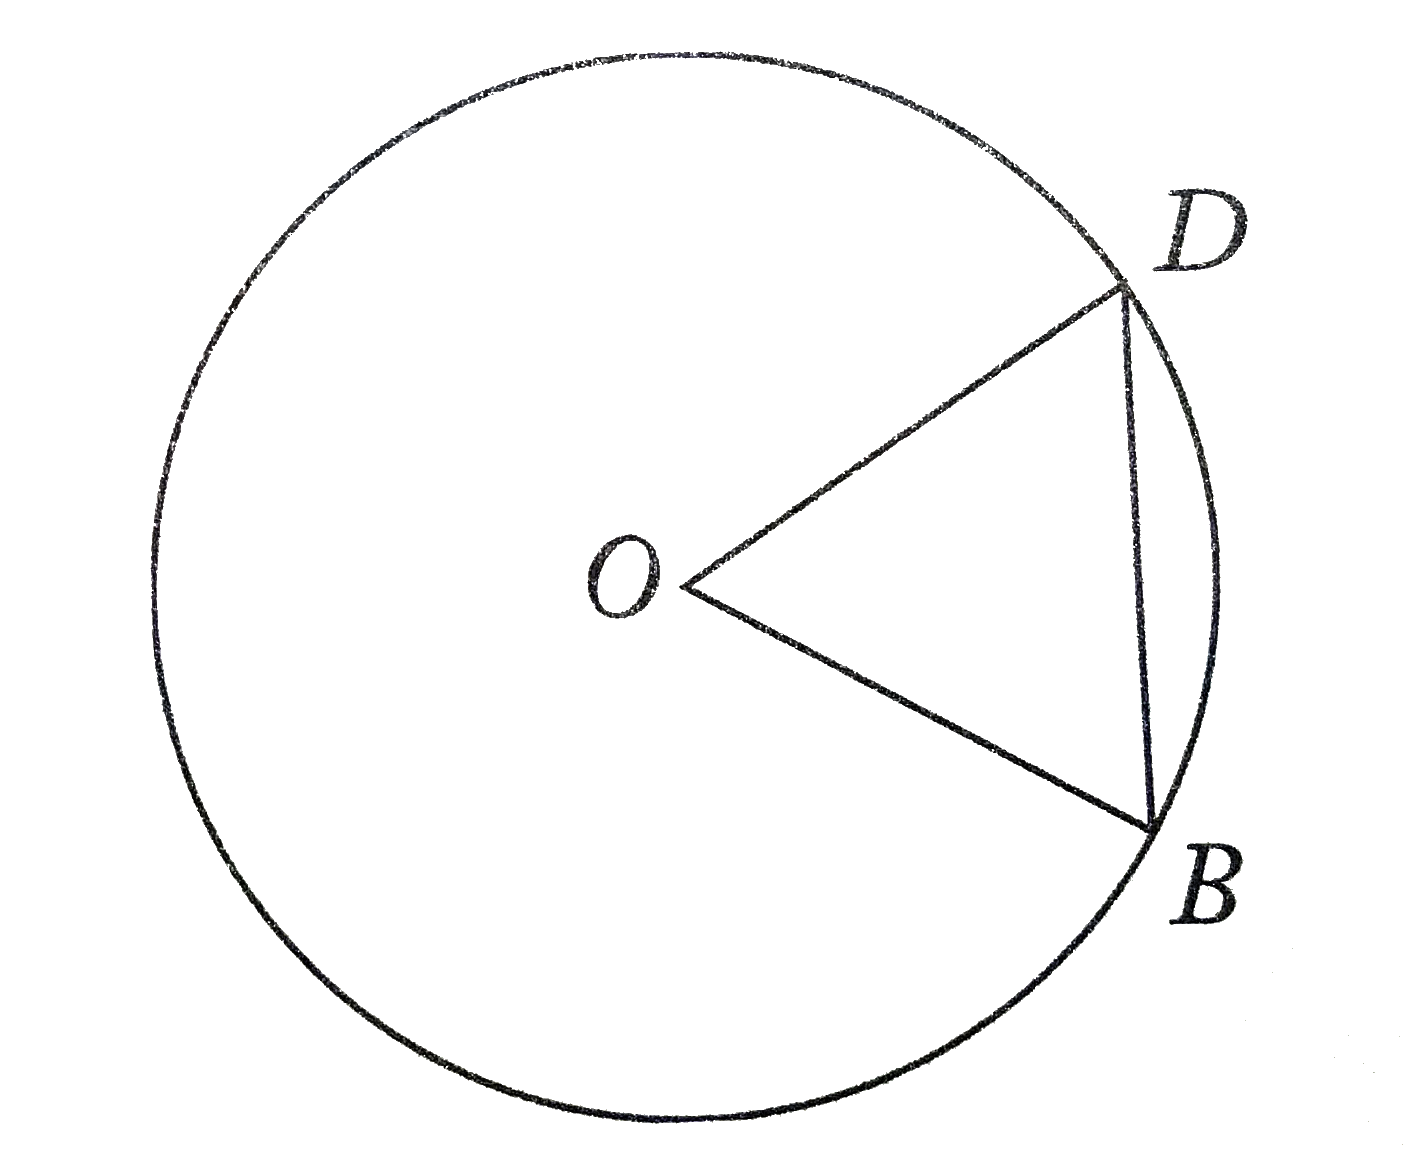 In the circle with center O, OD=BD and arc DB=2pi. What is the area of the circle?